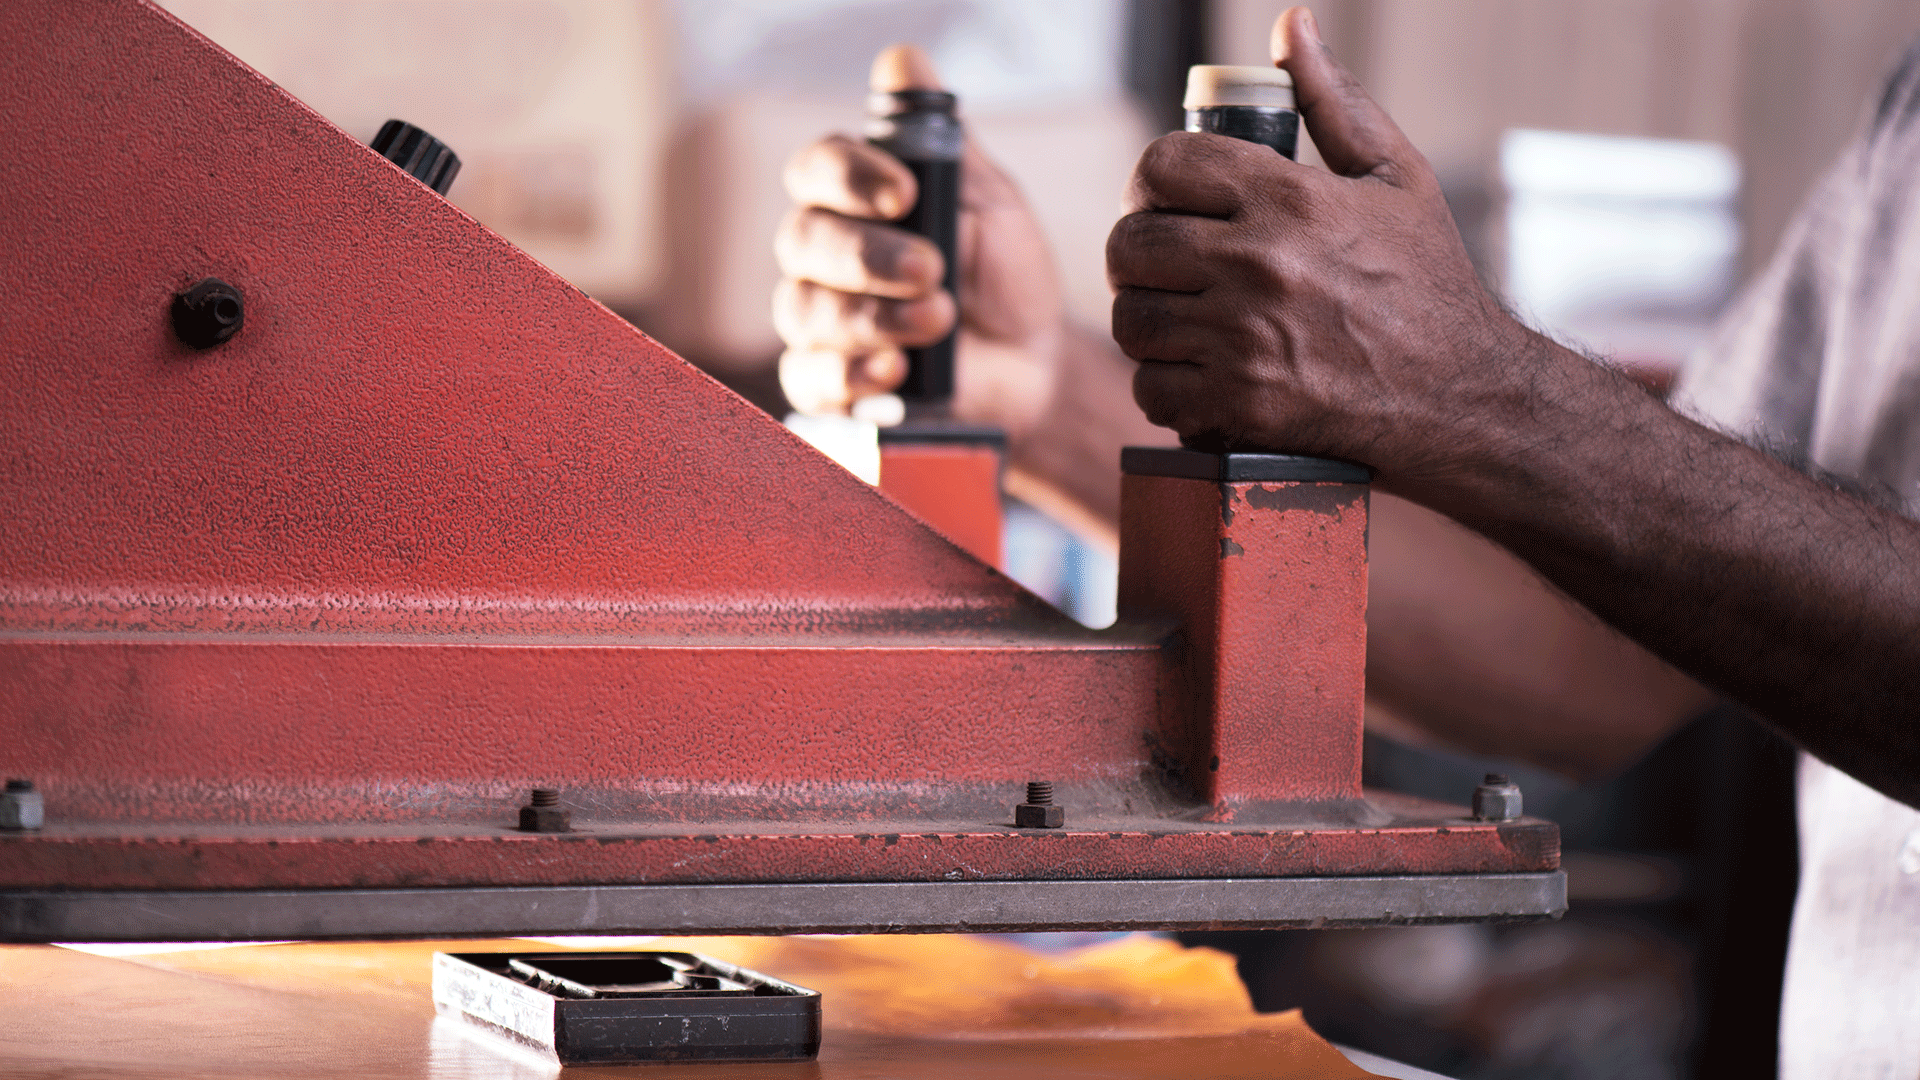 Worker's hands operating a red industrial machine in a workshop setting.